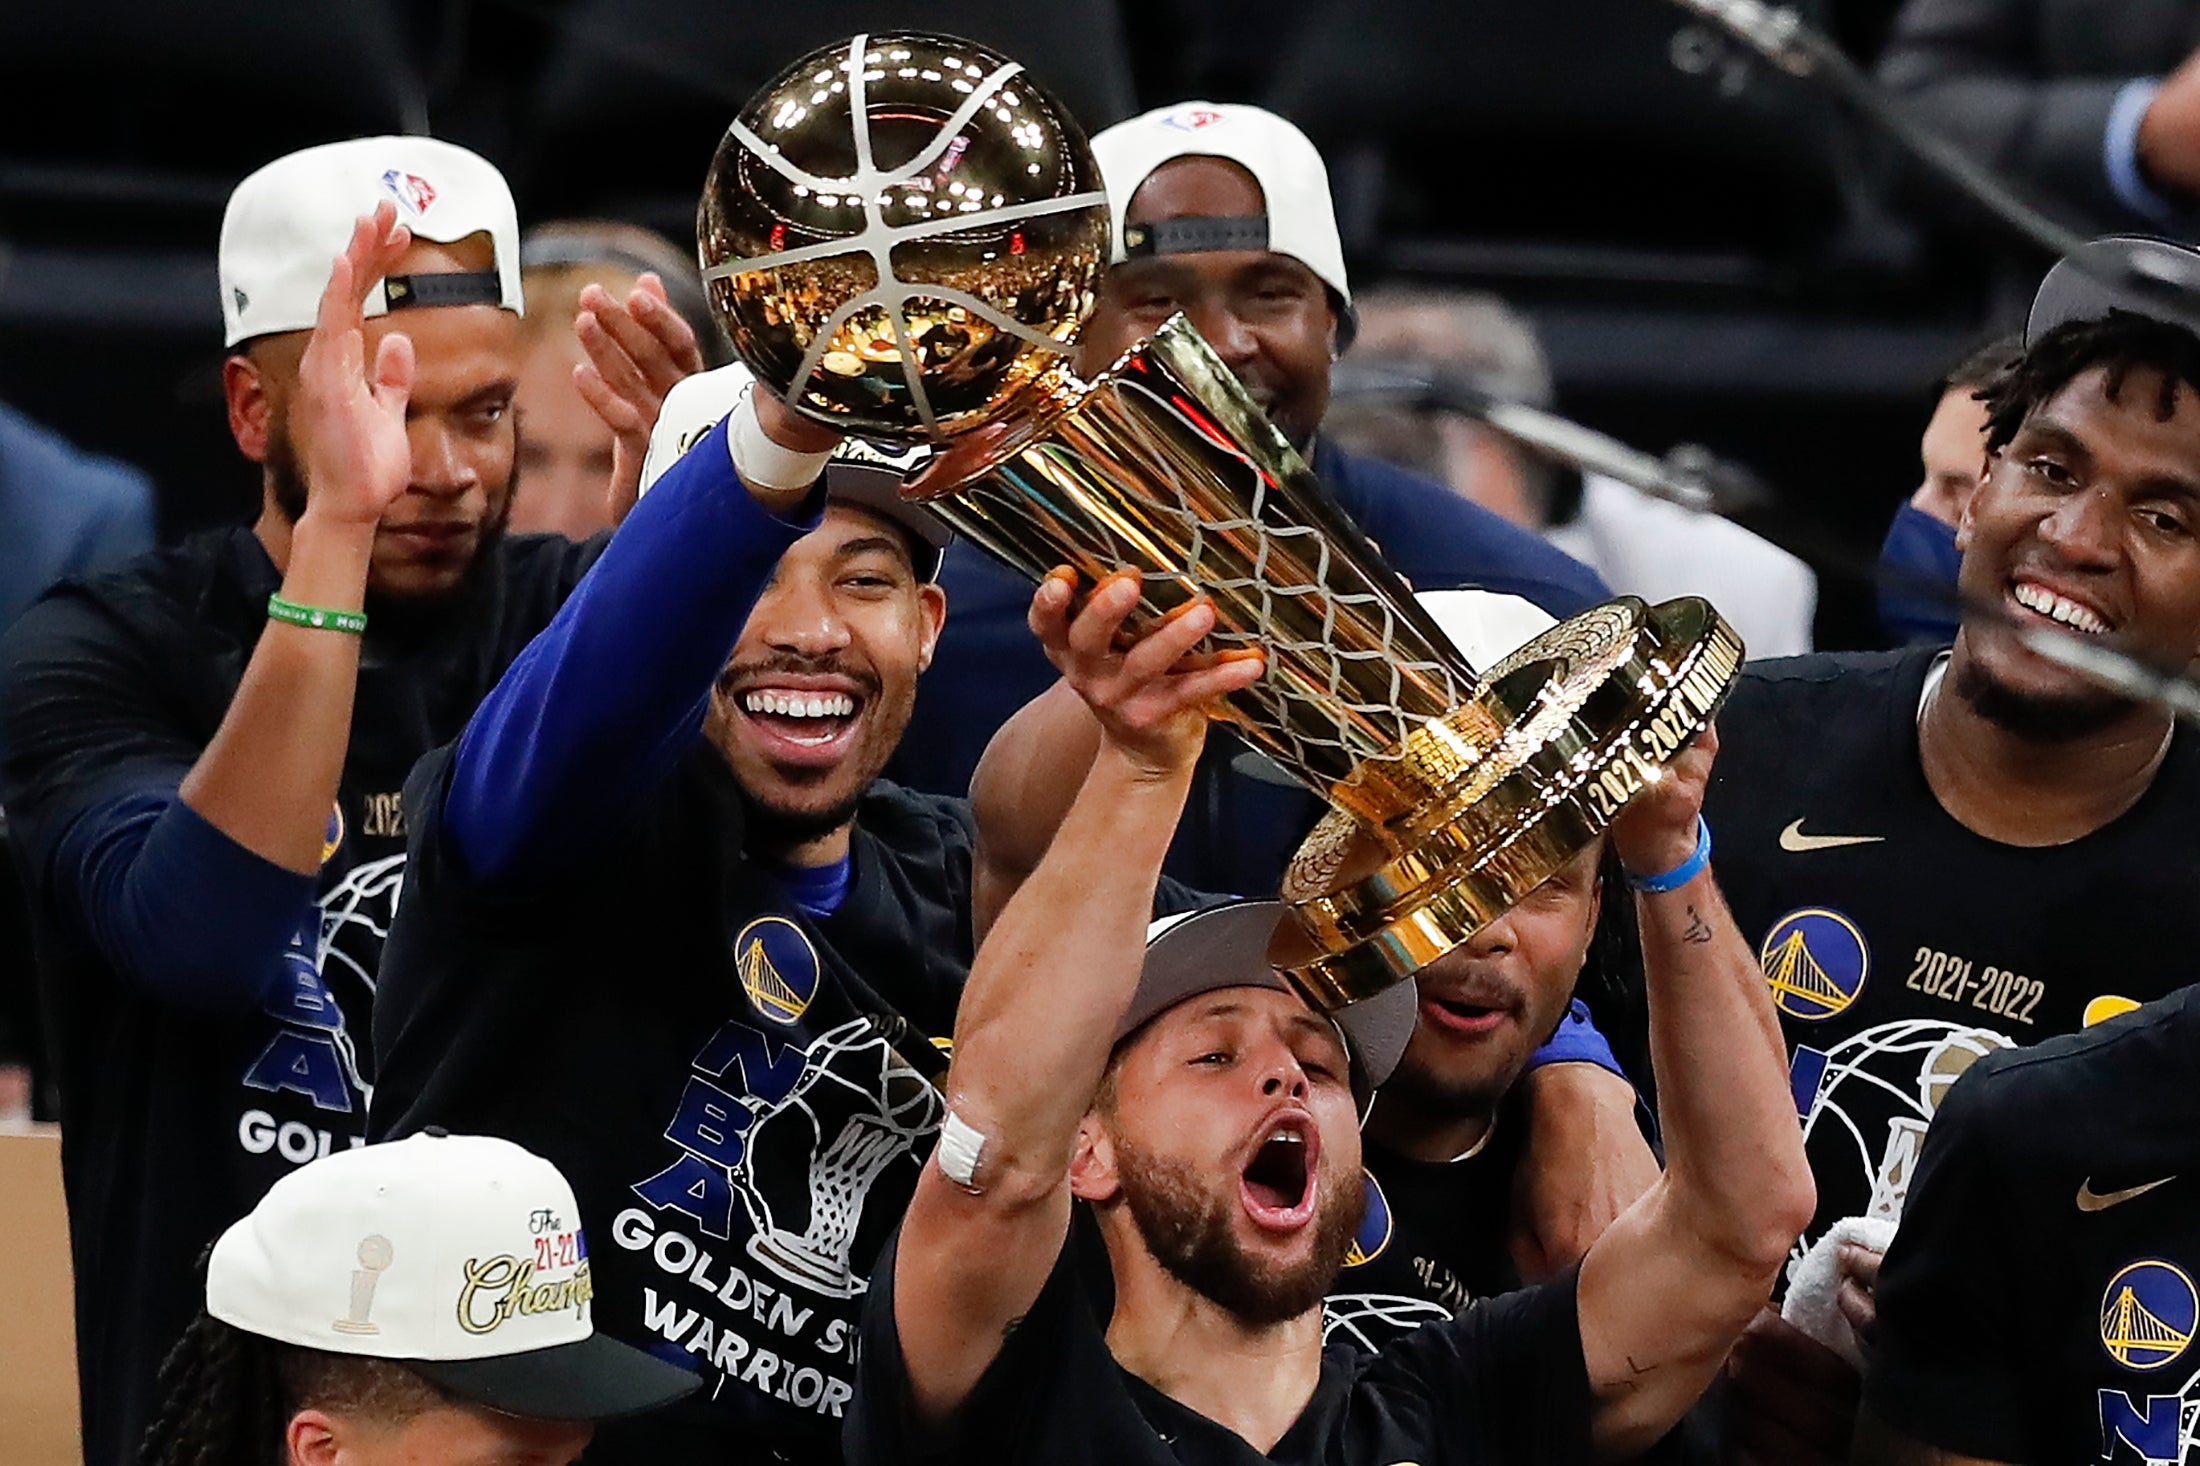 Stephen Curry wins 2022 Finals MVP: What does it mean for his legacy?